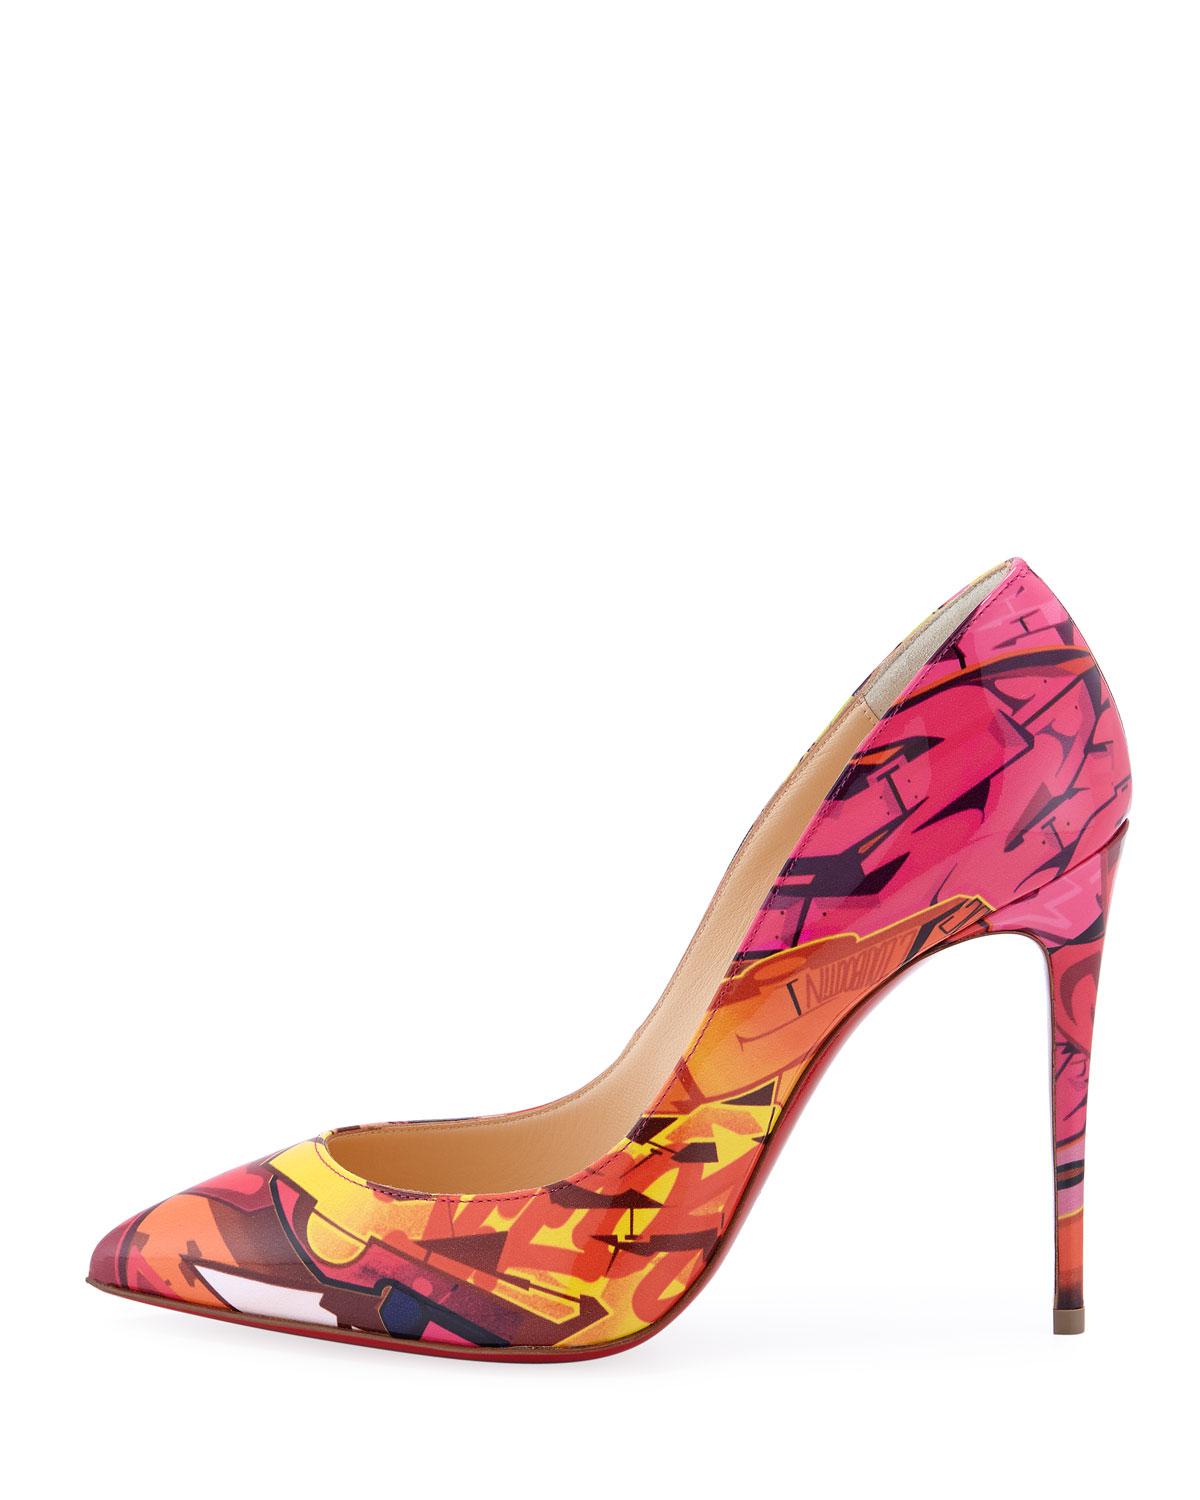 christian louboutin pigalle follies satin red sole pump multicolor